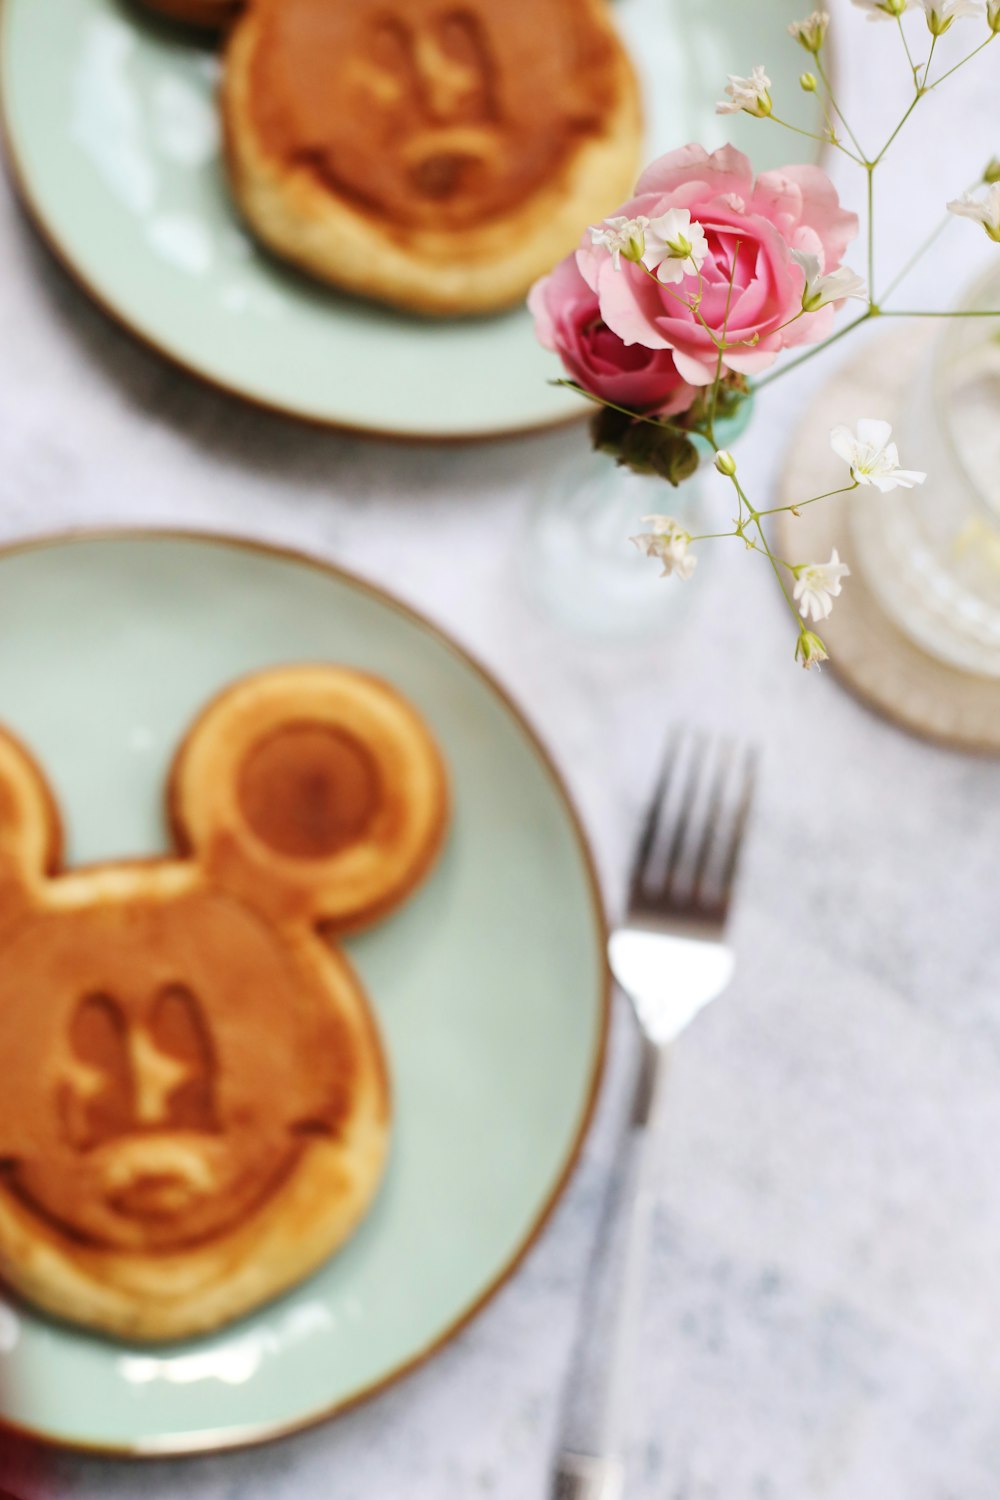 two plates of Mickey Mouse face pancakes on table